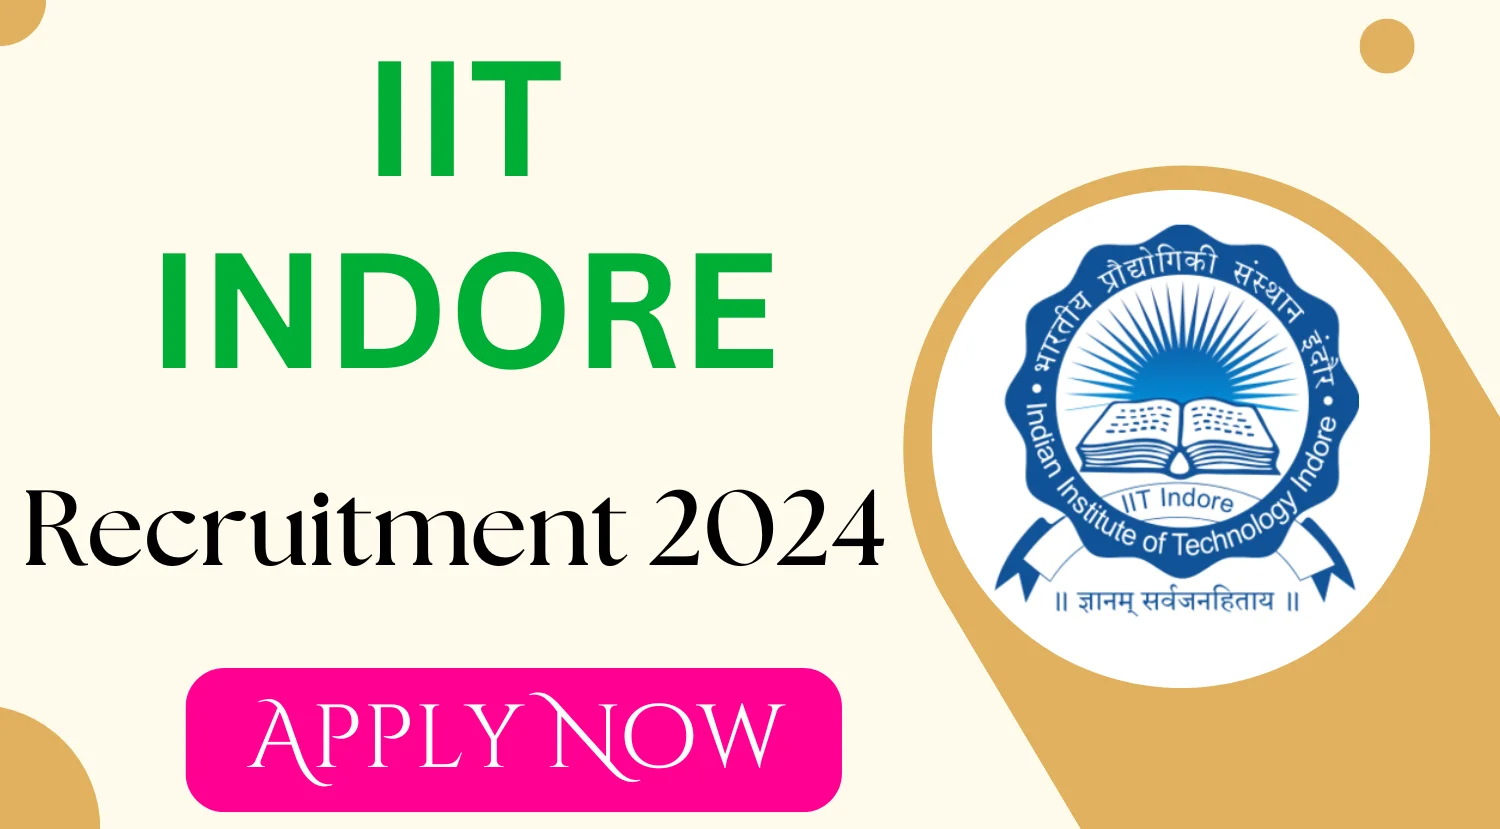 IIT Indore Finance Manager and IT Technical Instructor Recruitment 2024